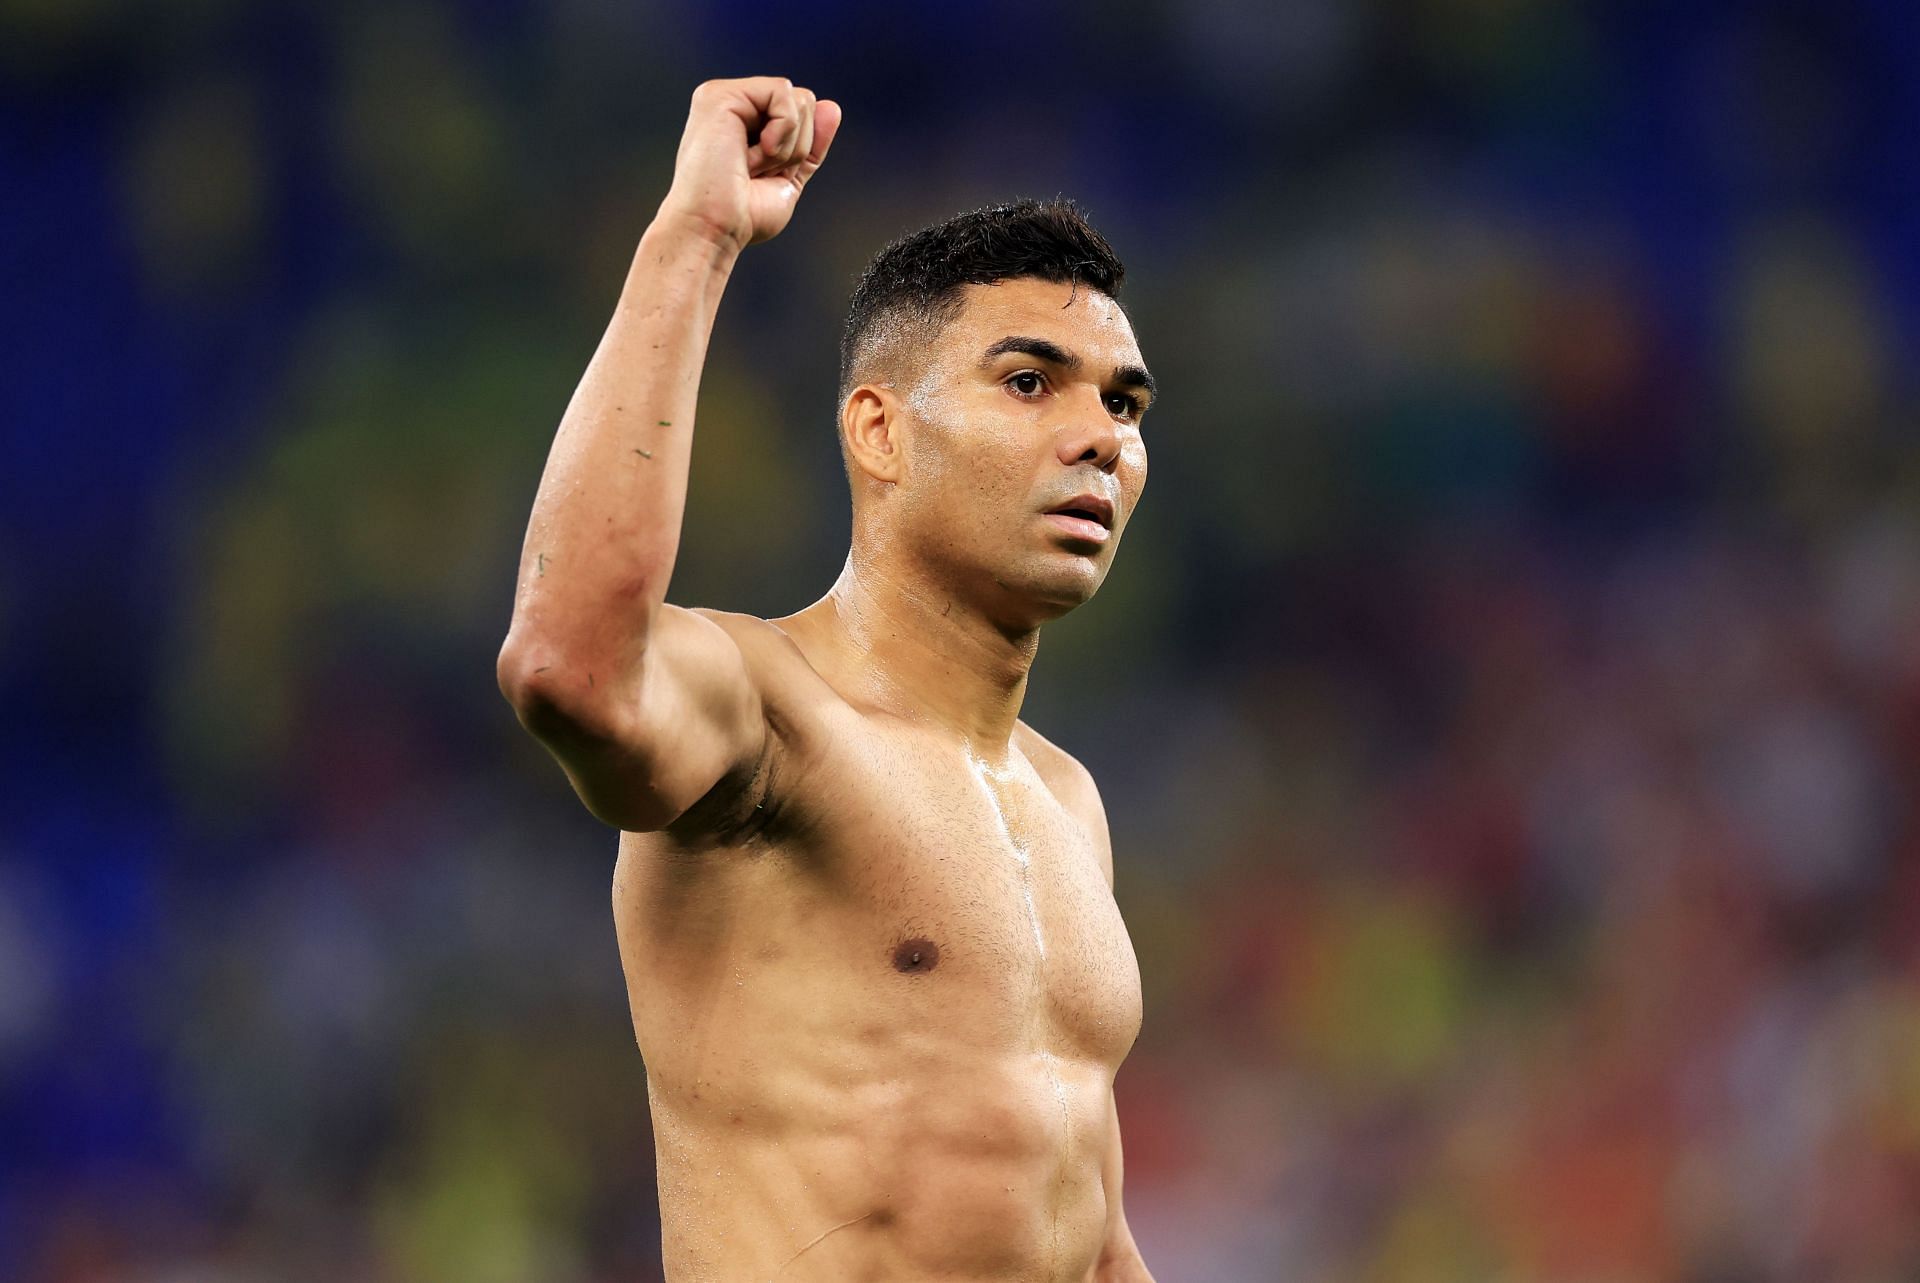 Casemiro was signed from Real Madrid by Manchester United in the summer.